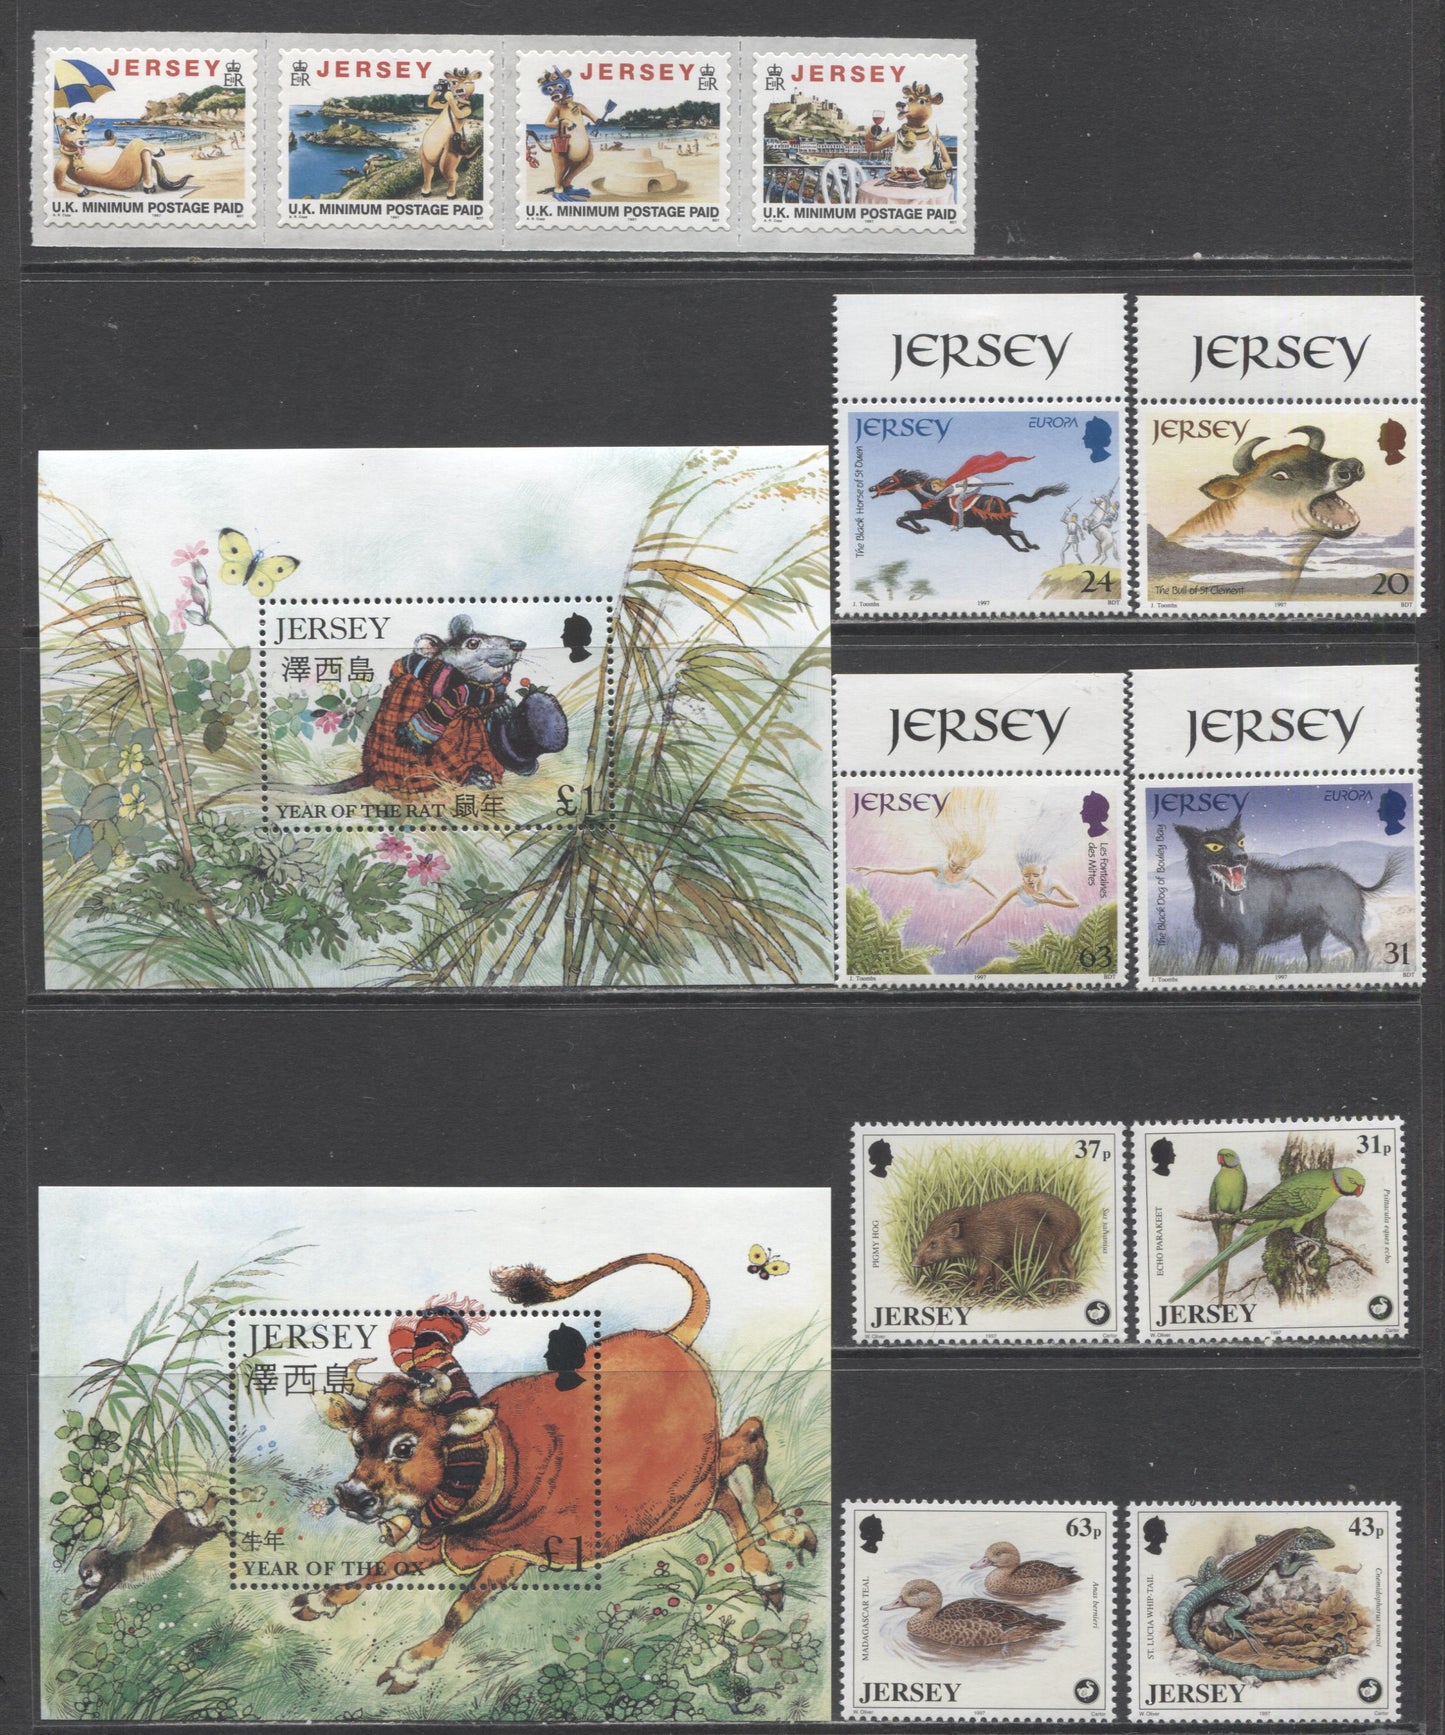 Lot 38 Great Britain - Jersey SC#746/811 1996-1997 Year Of The Rat, Ox, Lillie The Cow, Stories/Legneds & Wildlife Preservation Issues, 13 VFNH/OG Singles, Strip Of 4 & Souvenir Sheet, 2017 Scott Cat. $20.25